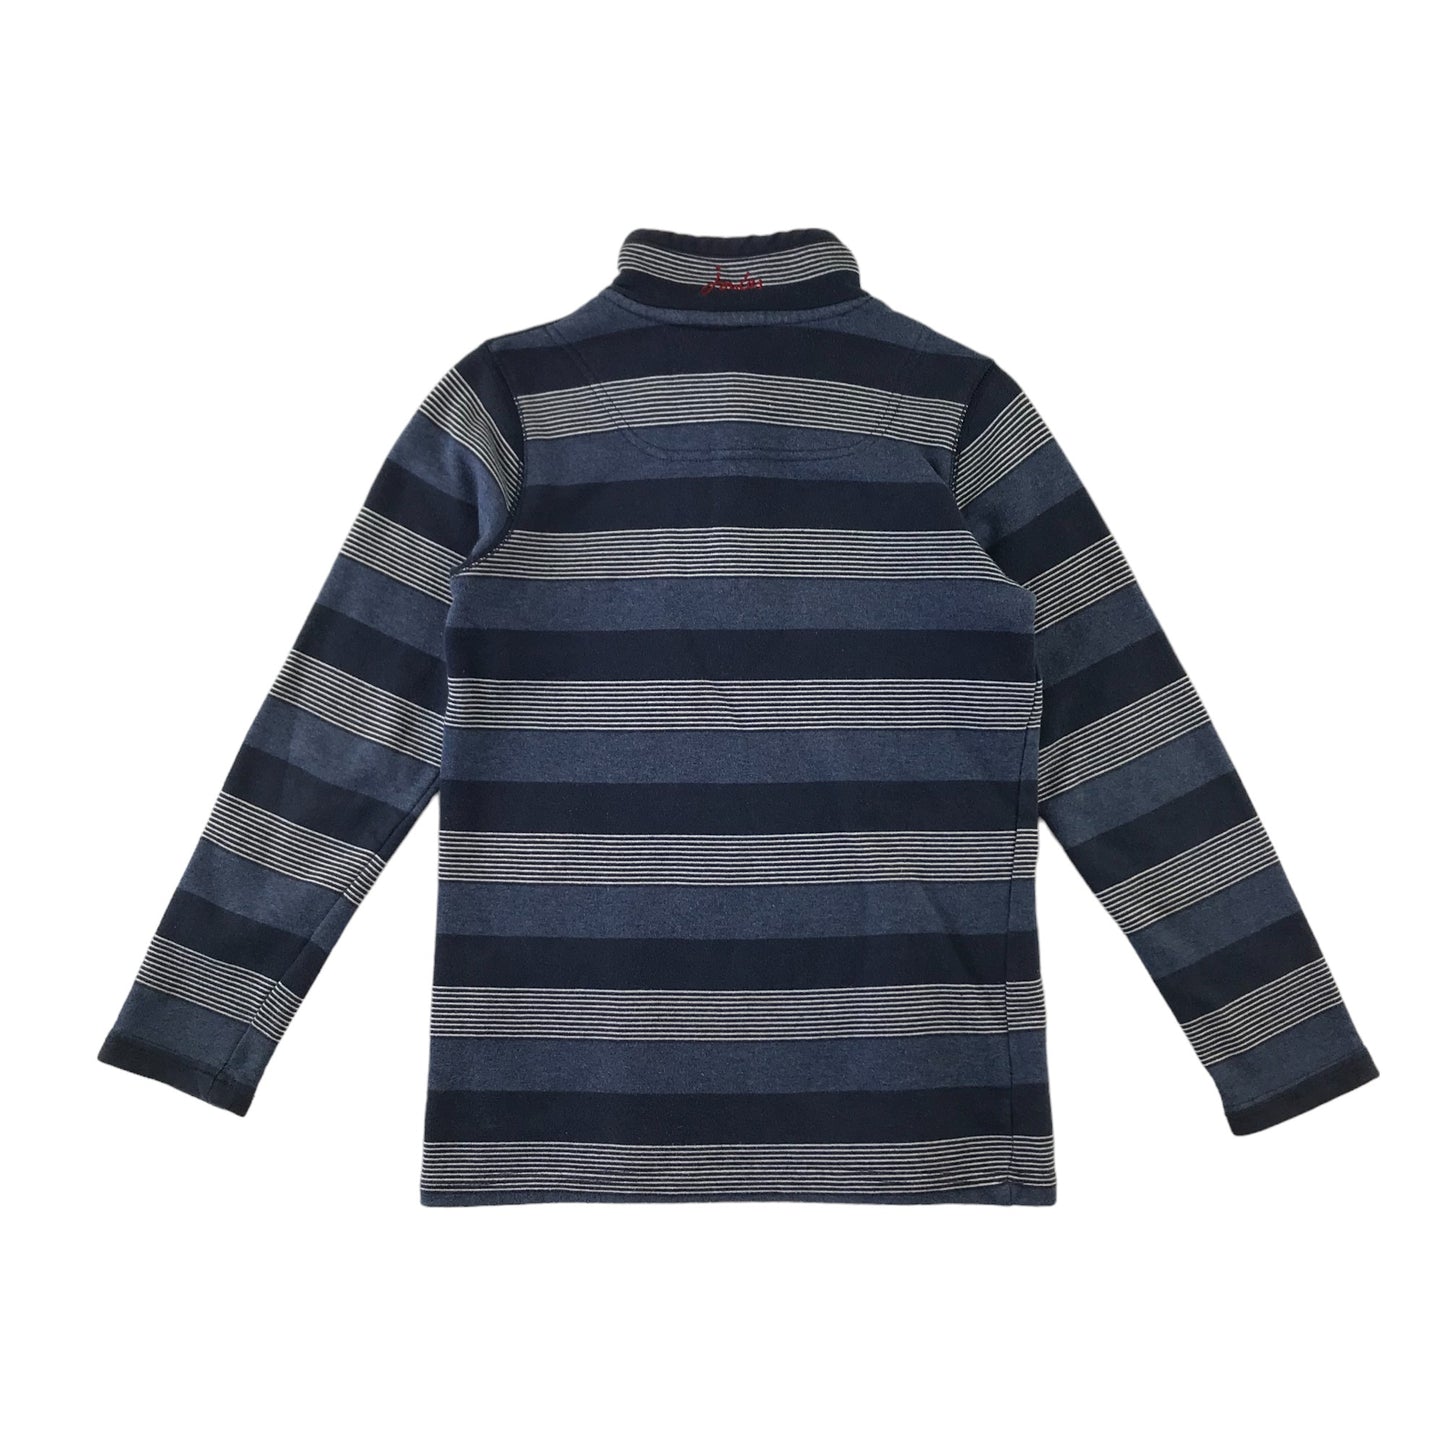 Joules sweater 9-10 years blue and grey stripy horizontal stripes jersey cotton